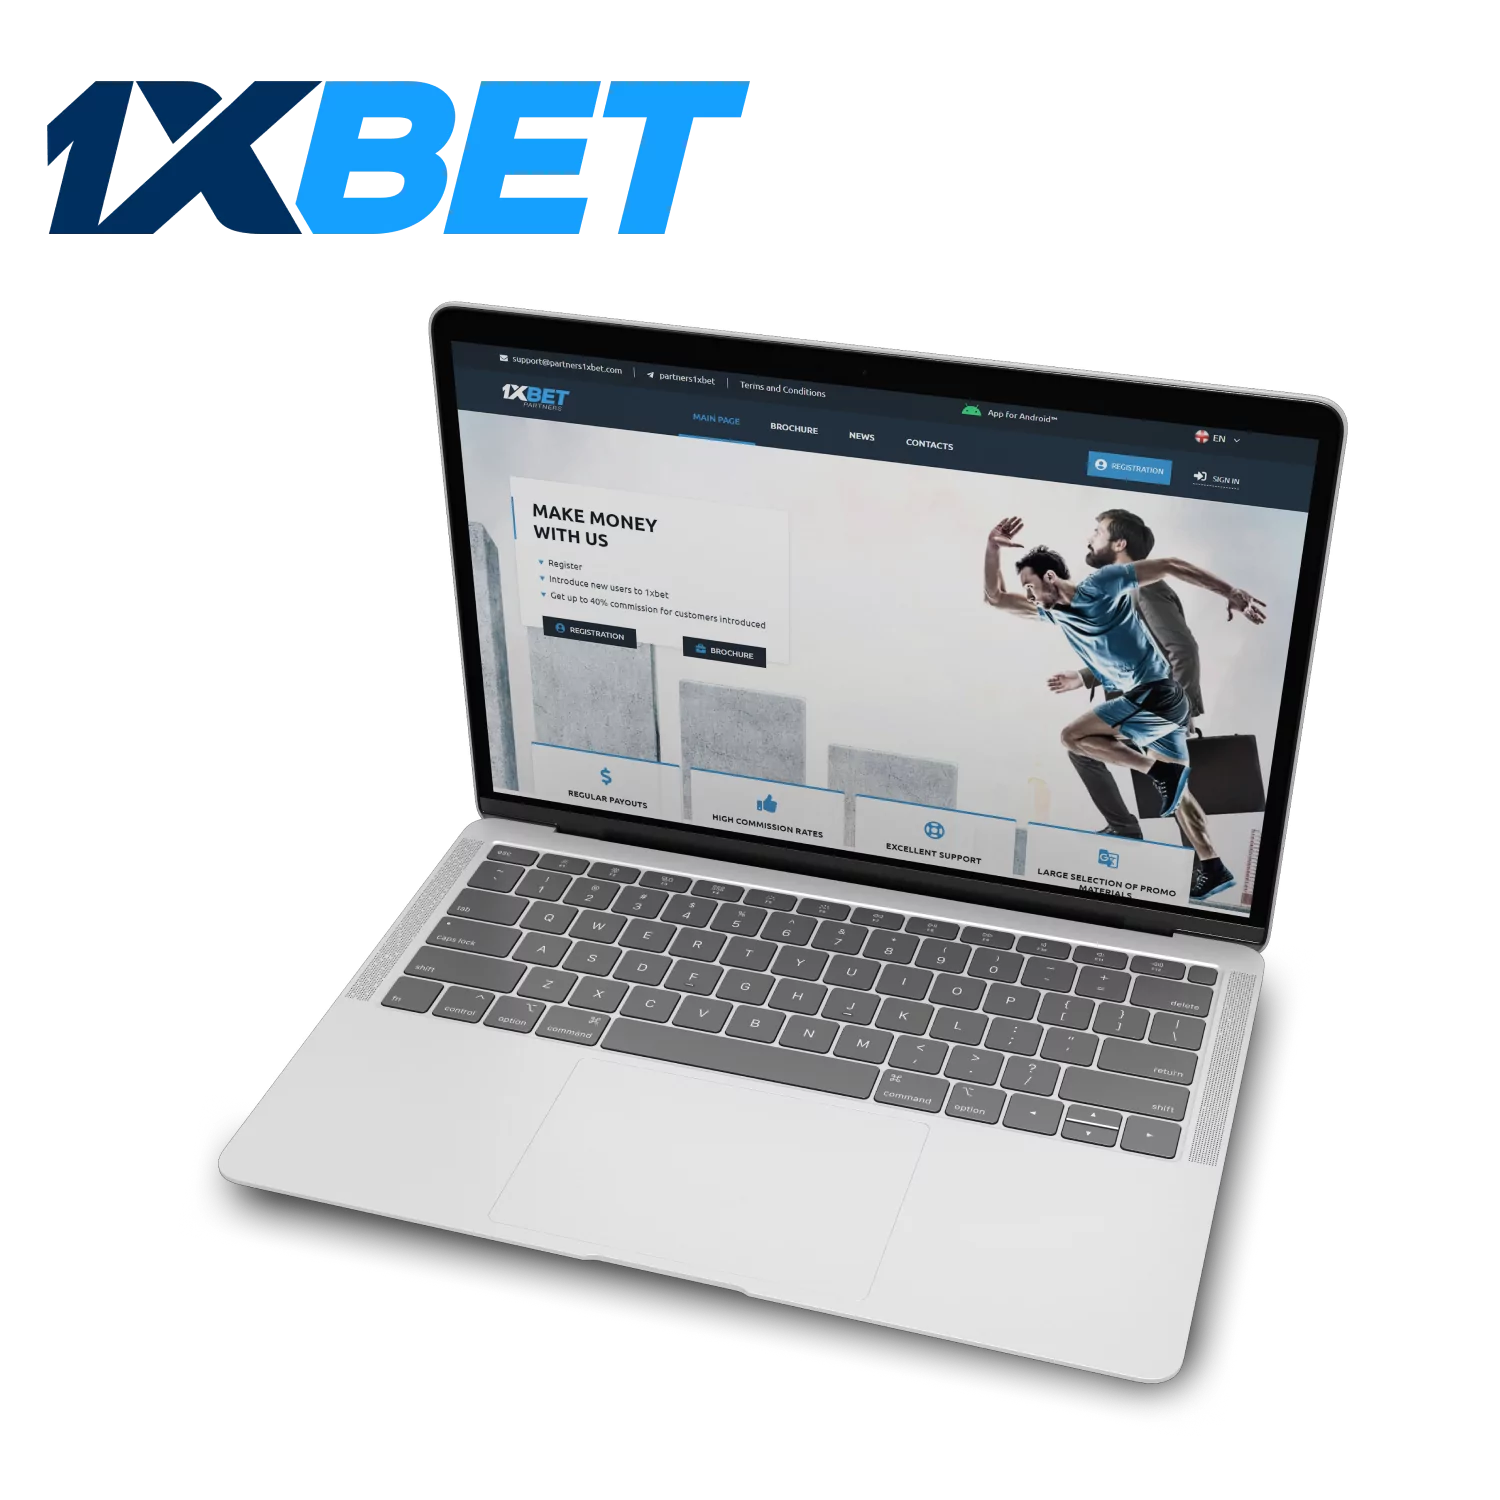 Learn more about the 1xbet affiliate program and the benefits you can get from it.